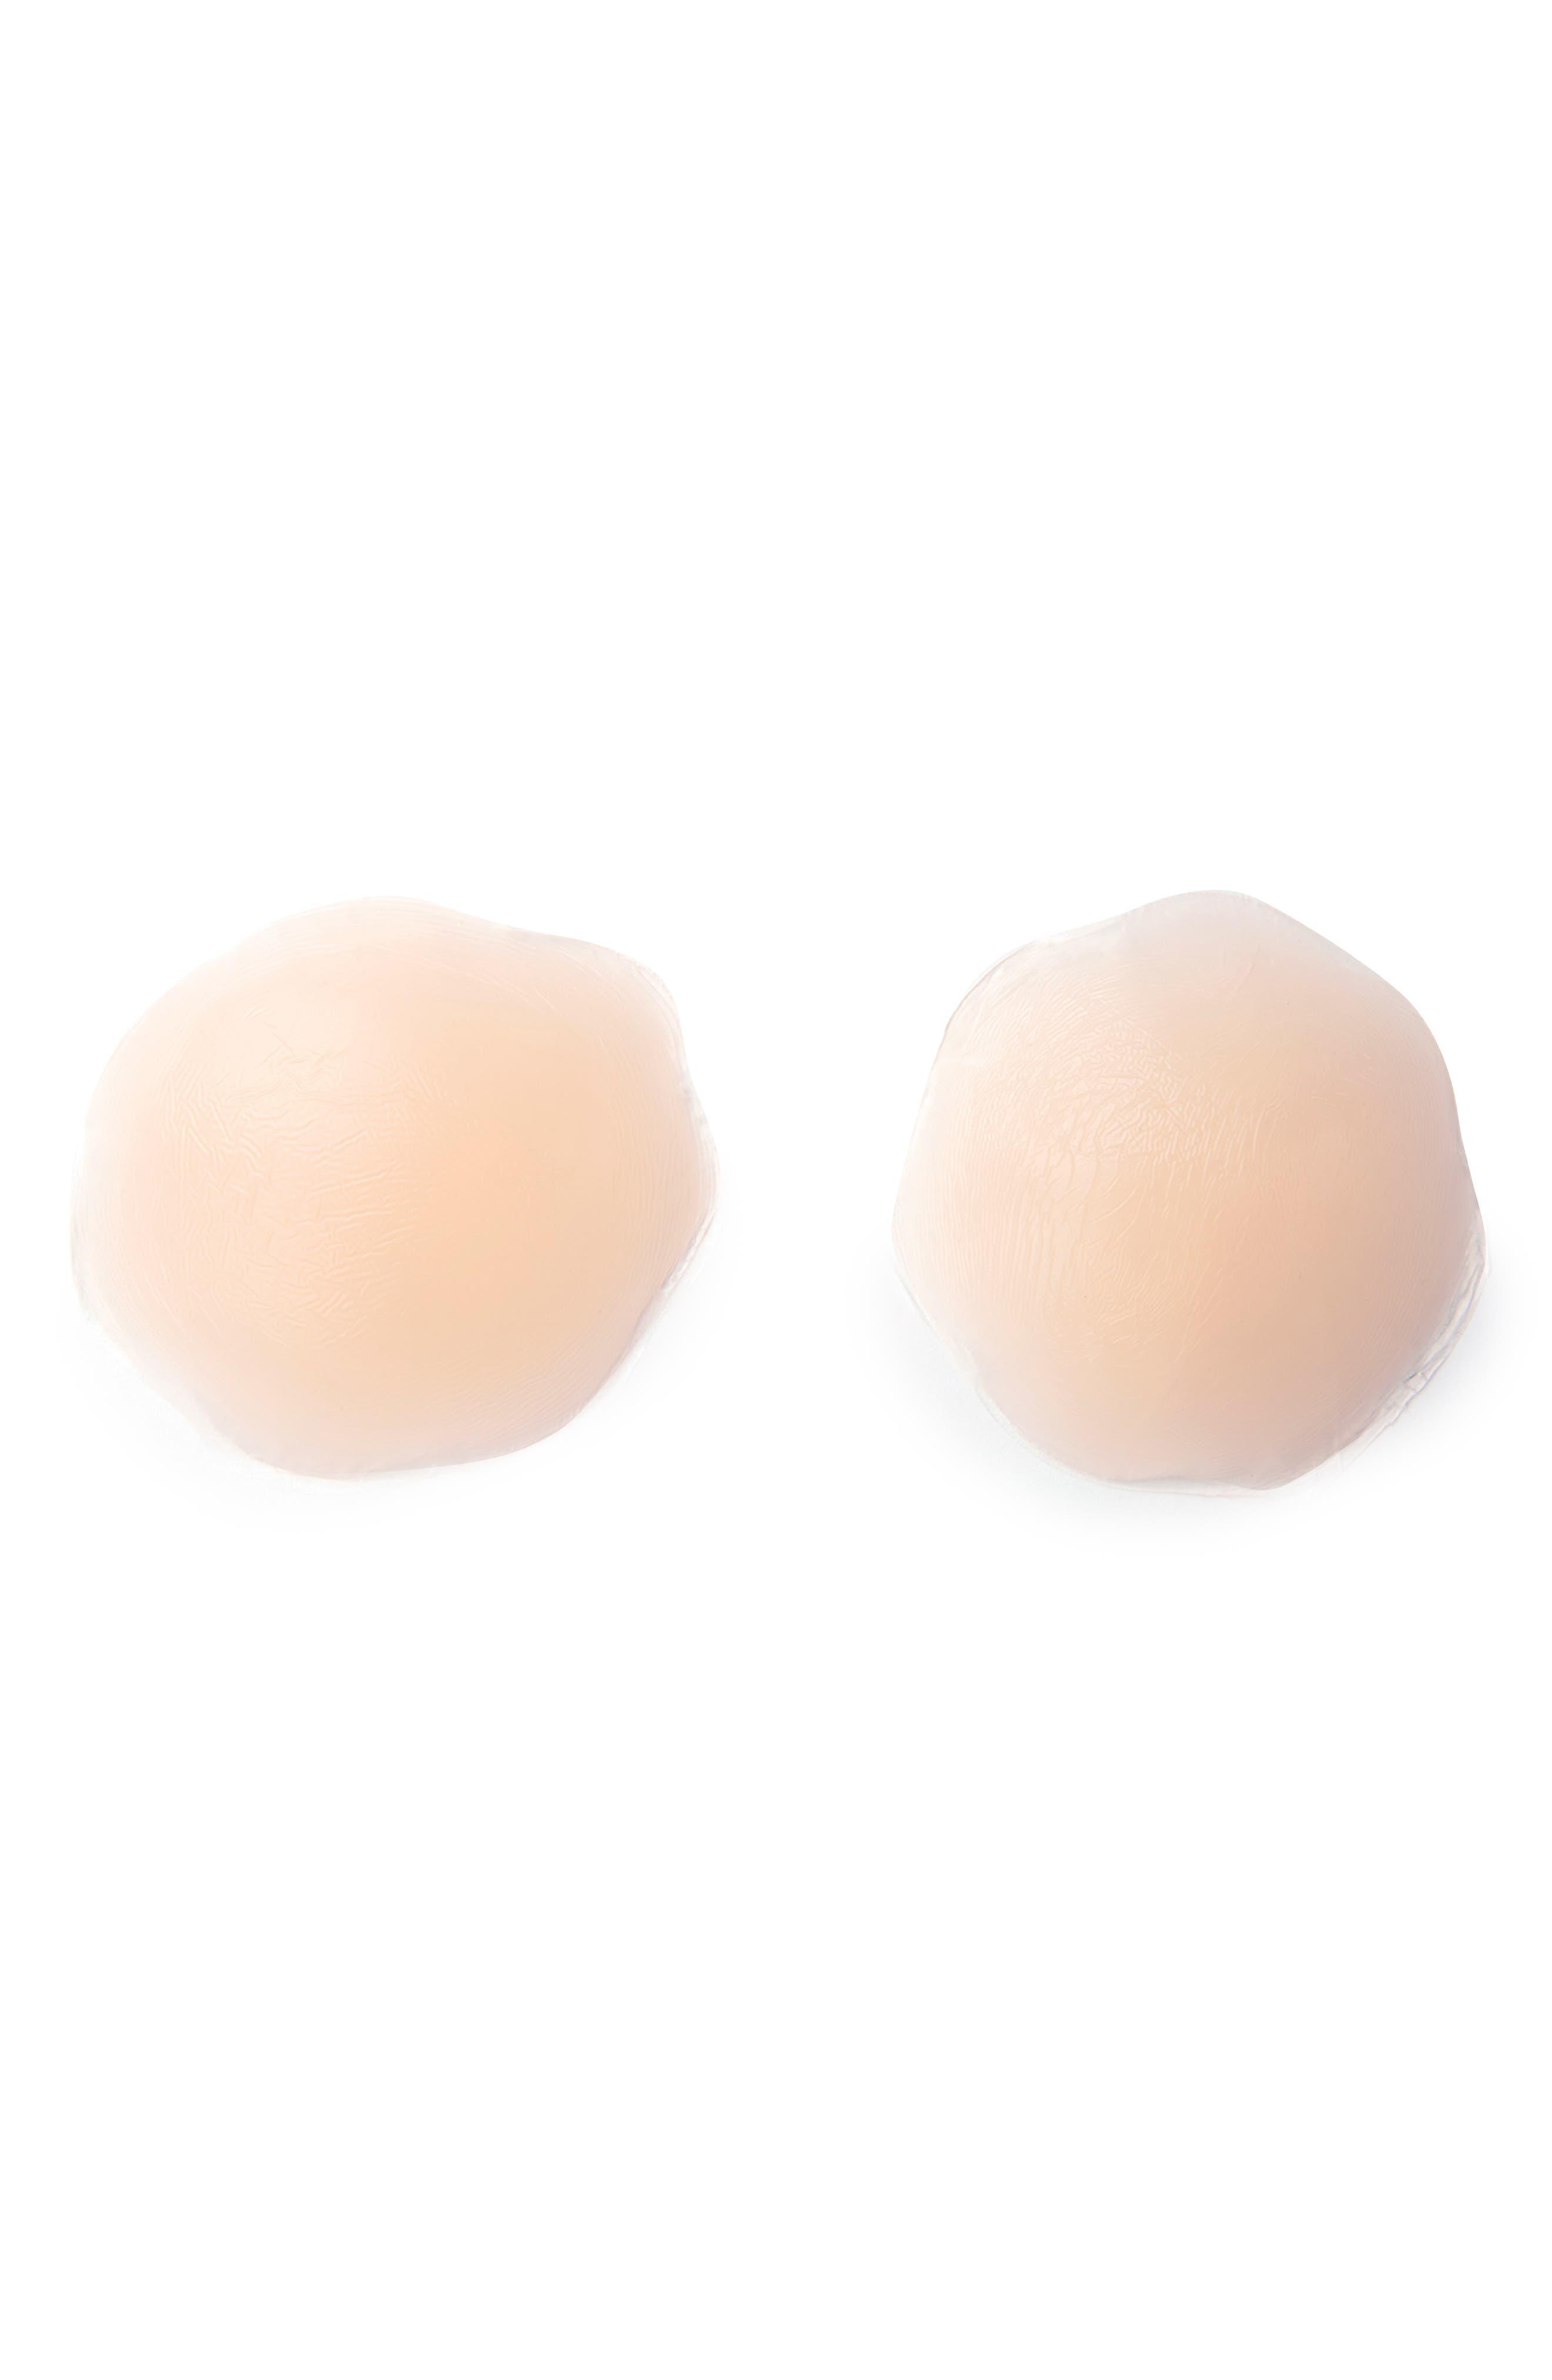 The Complete Breast Form Adhesive Kit